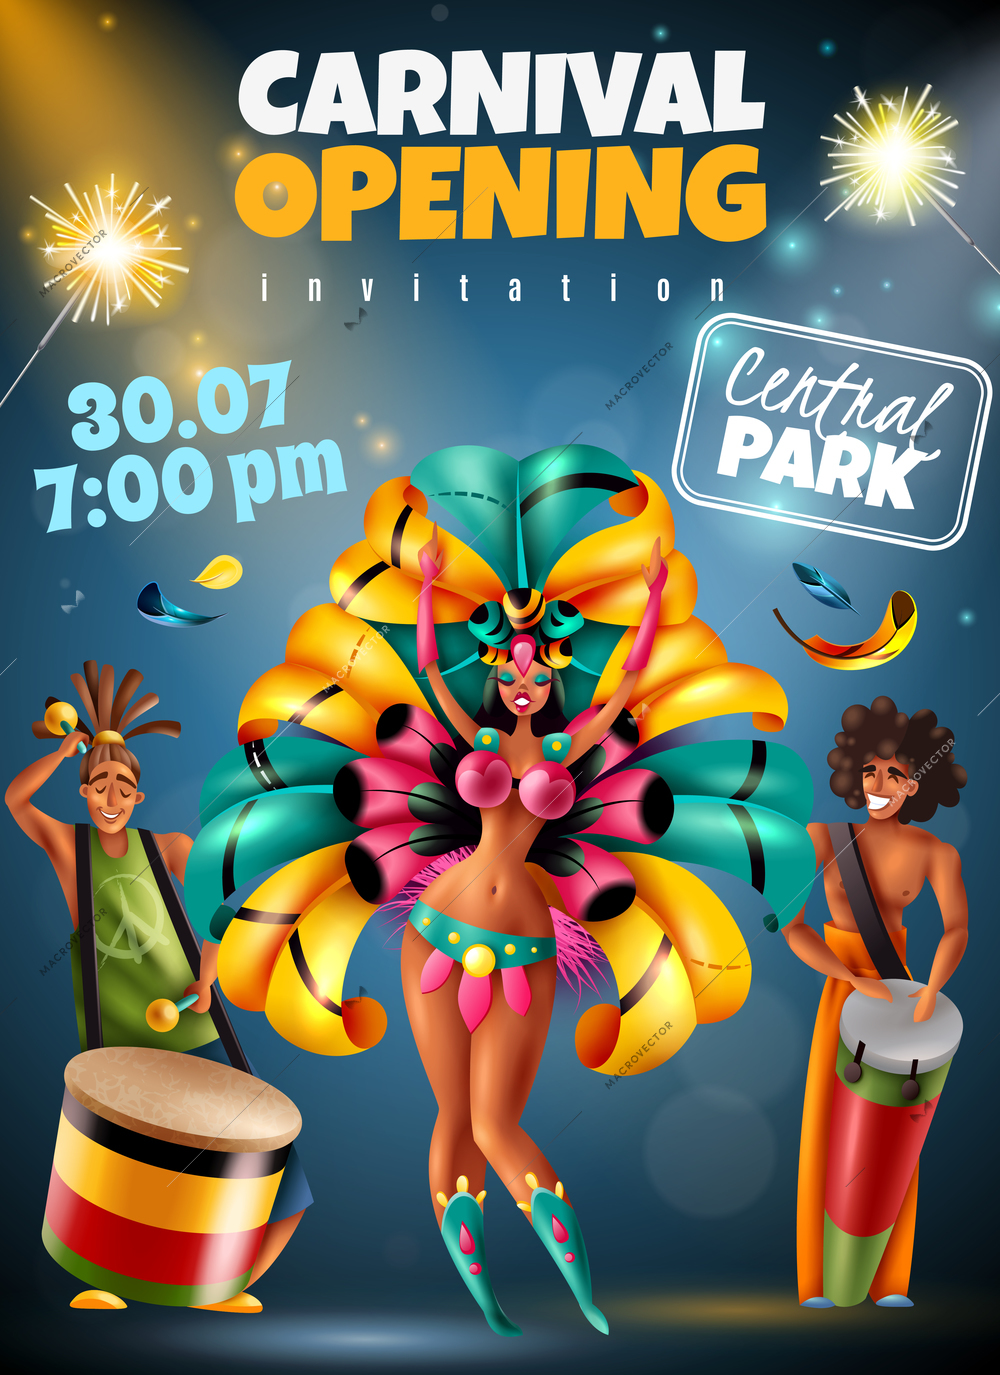 Brazilian annual carnival festival opening announcement colorful invitation poster with sparkling lights dancer musicians costumes vector illustration